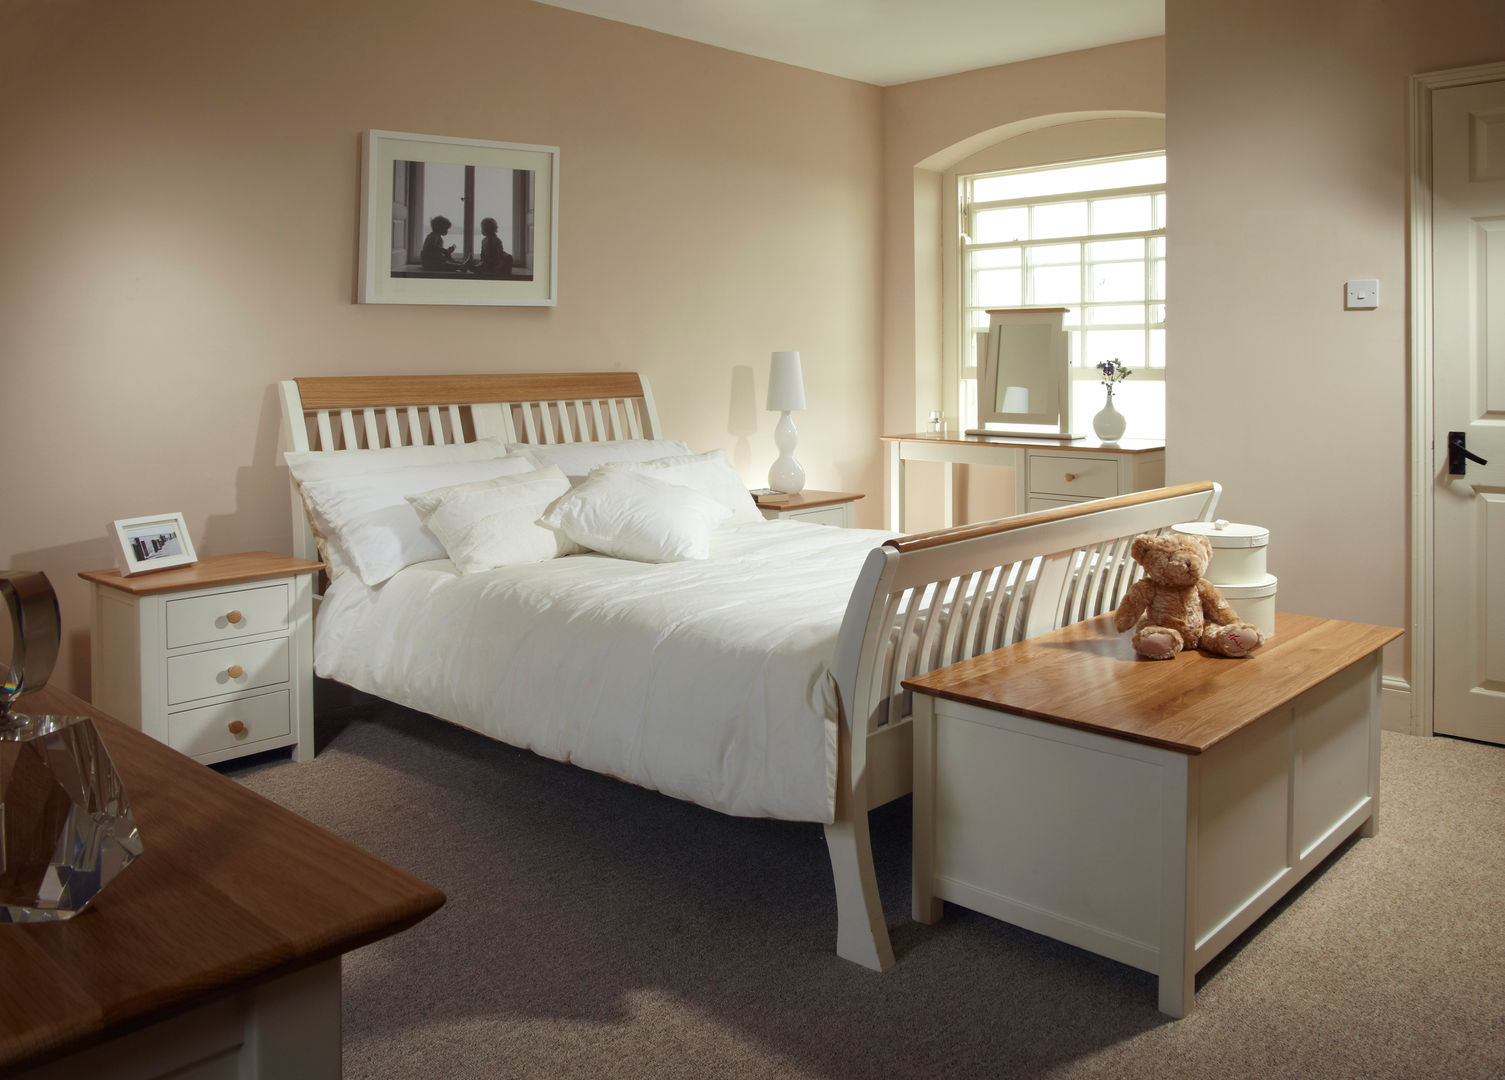 Cotsworld, The Painted Furniture Company The Painted Furniture Company Kamar Tidur Klasik Beds & headboards